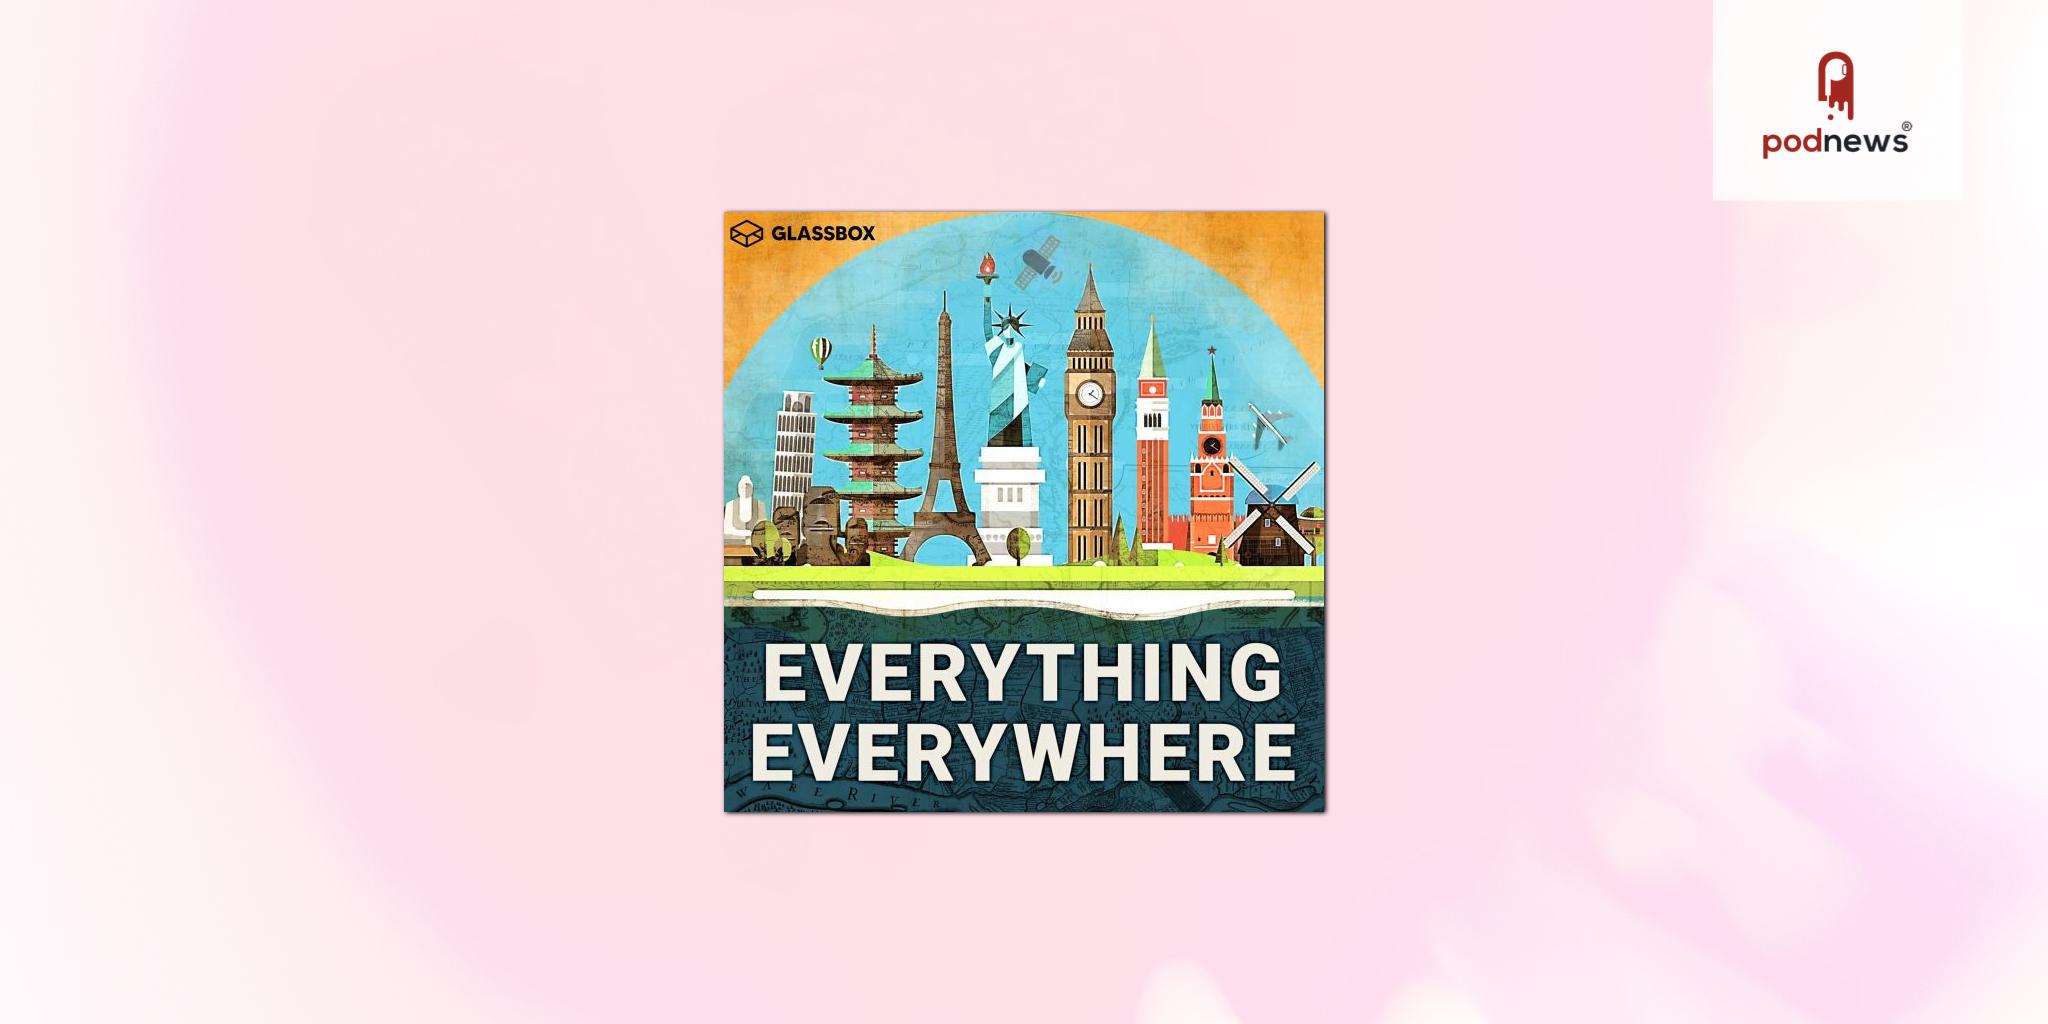 “Everything Everywhere Daily”, Hosted by Gary Arndt, Acquired by Glassbox Media